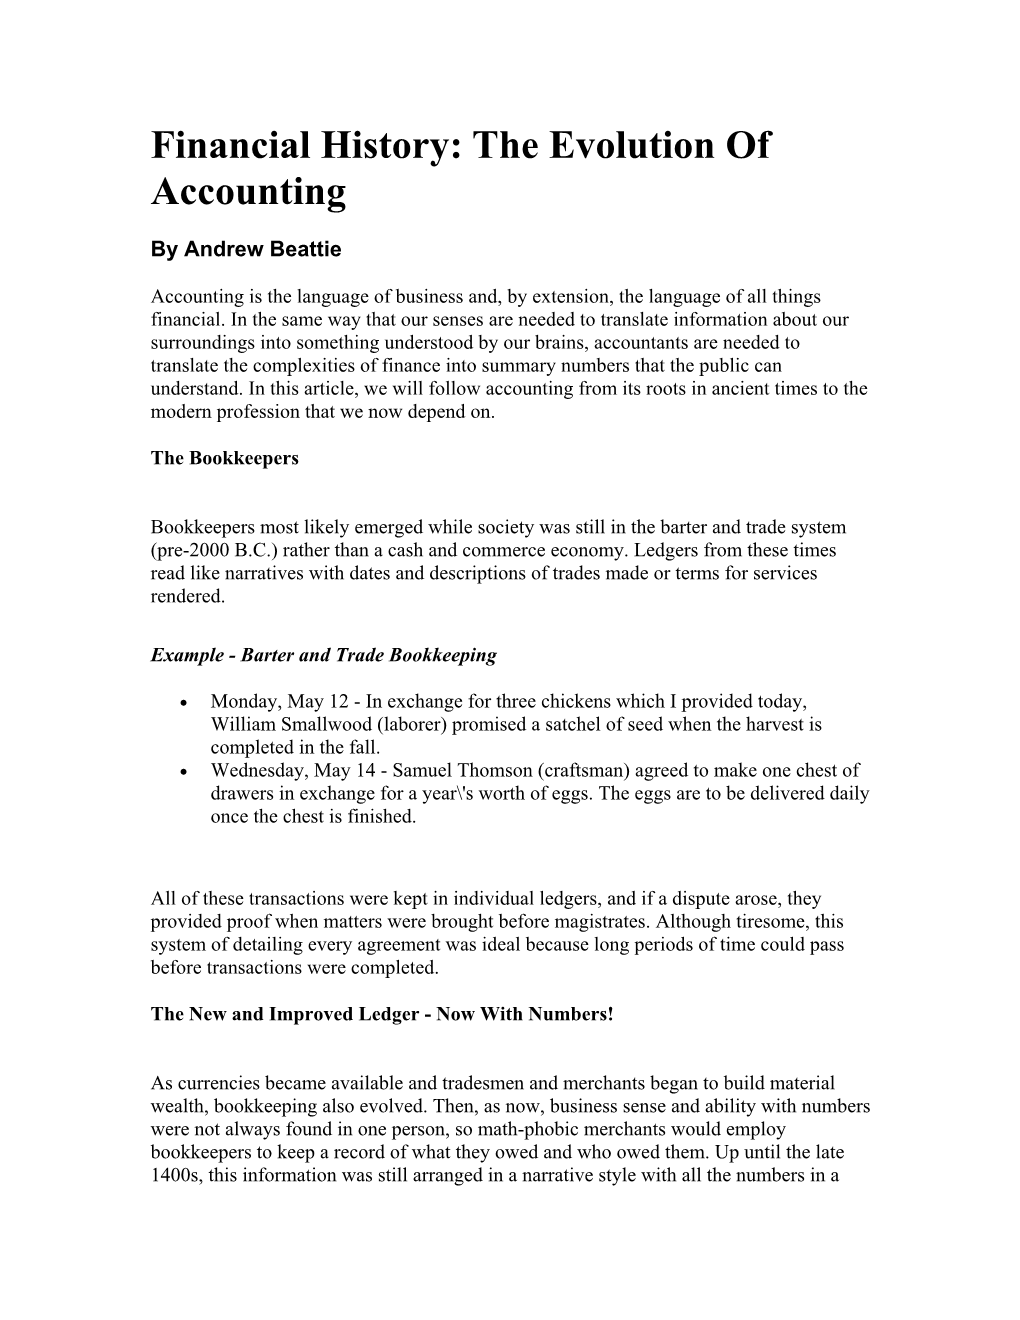 Financial History: the Evolution of Accounting